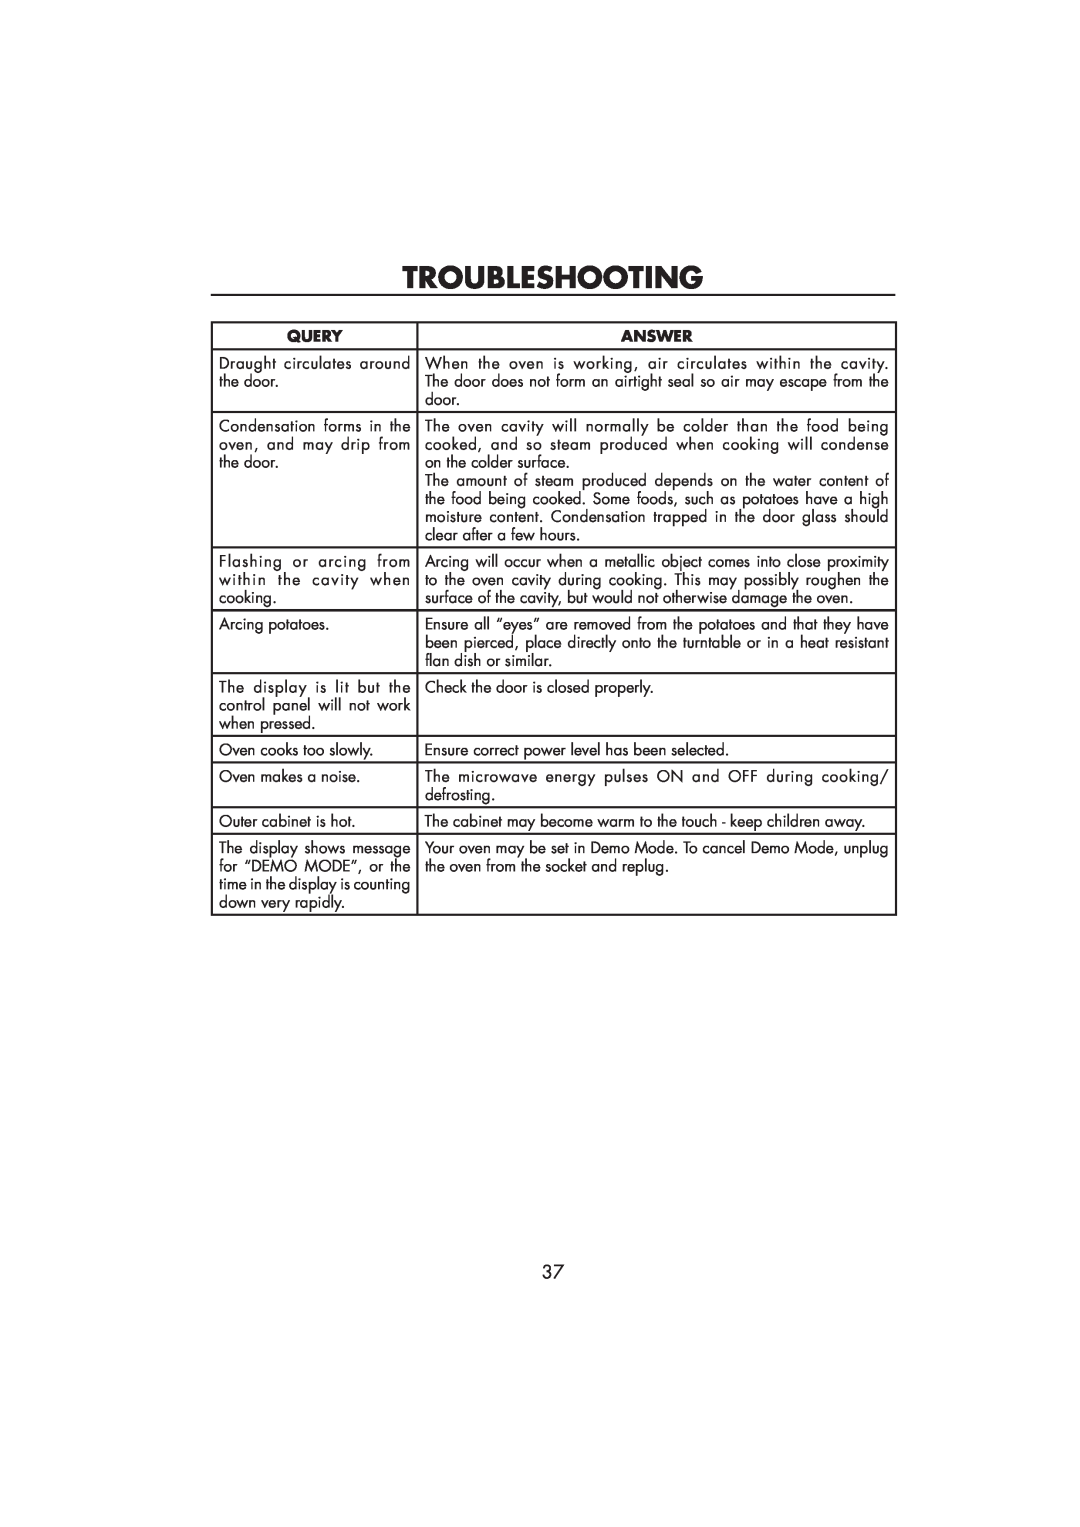 Sharp R-890SLM operation manual Troubleshooting, Query, Answer 